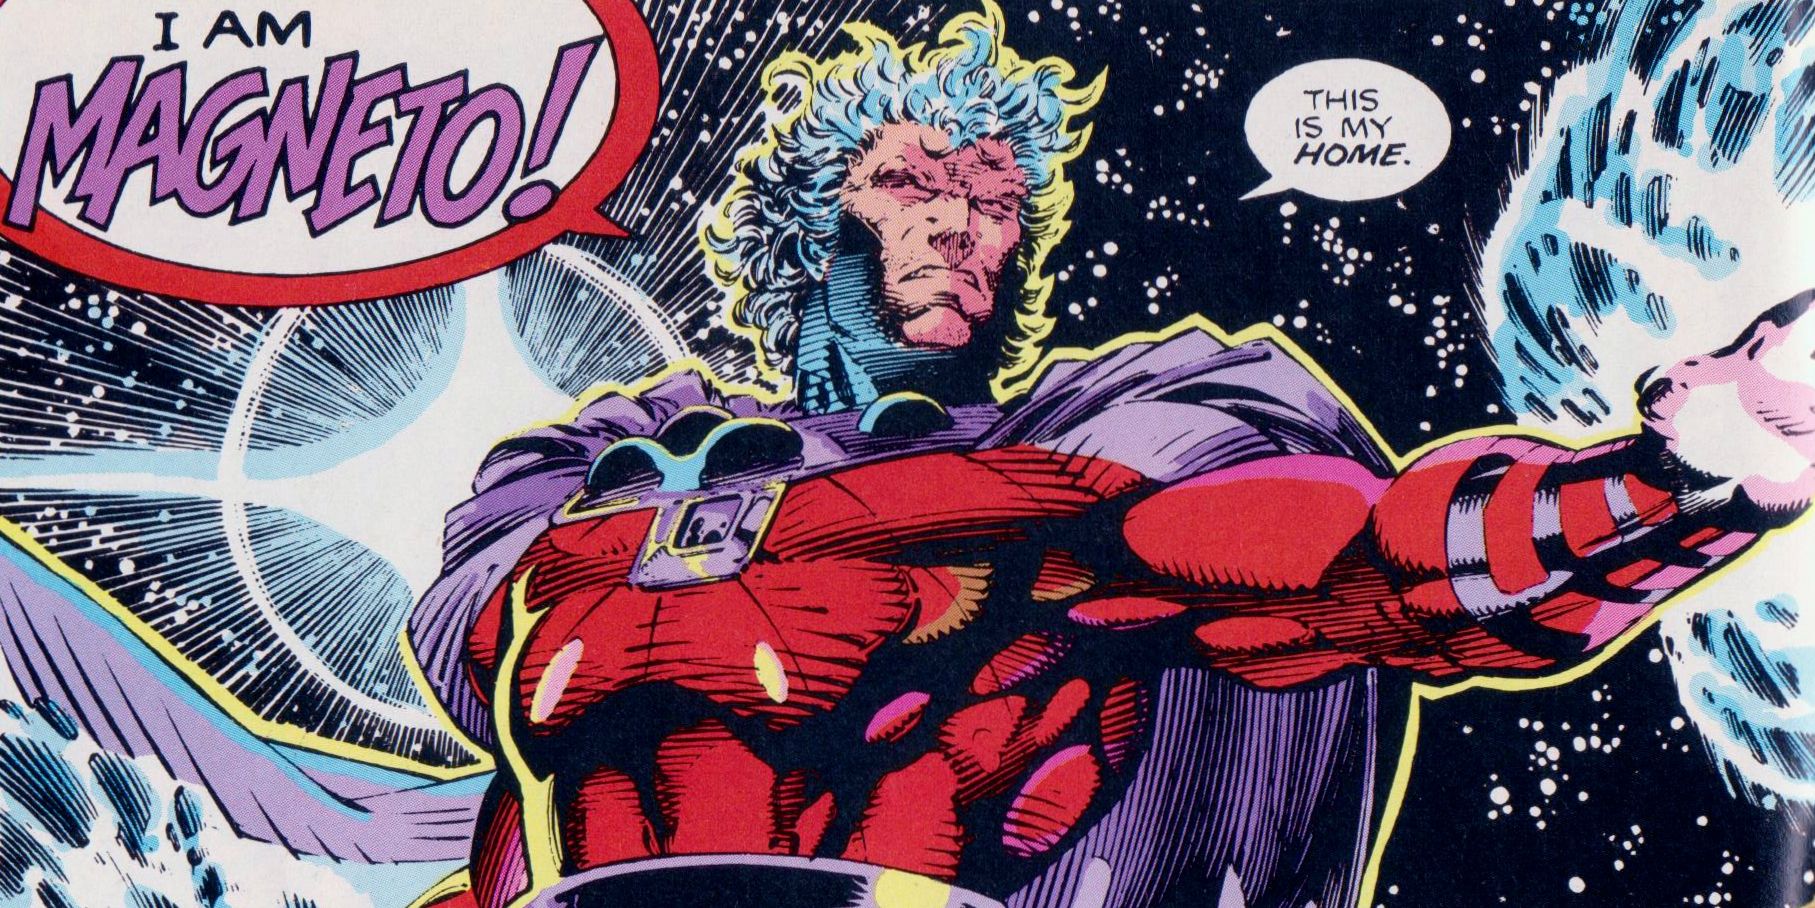 Magneto in Space